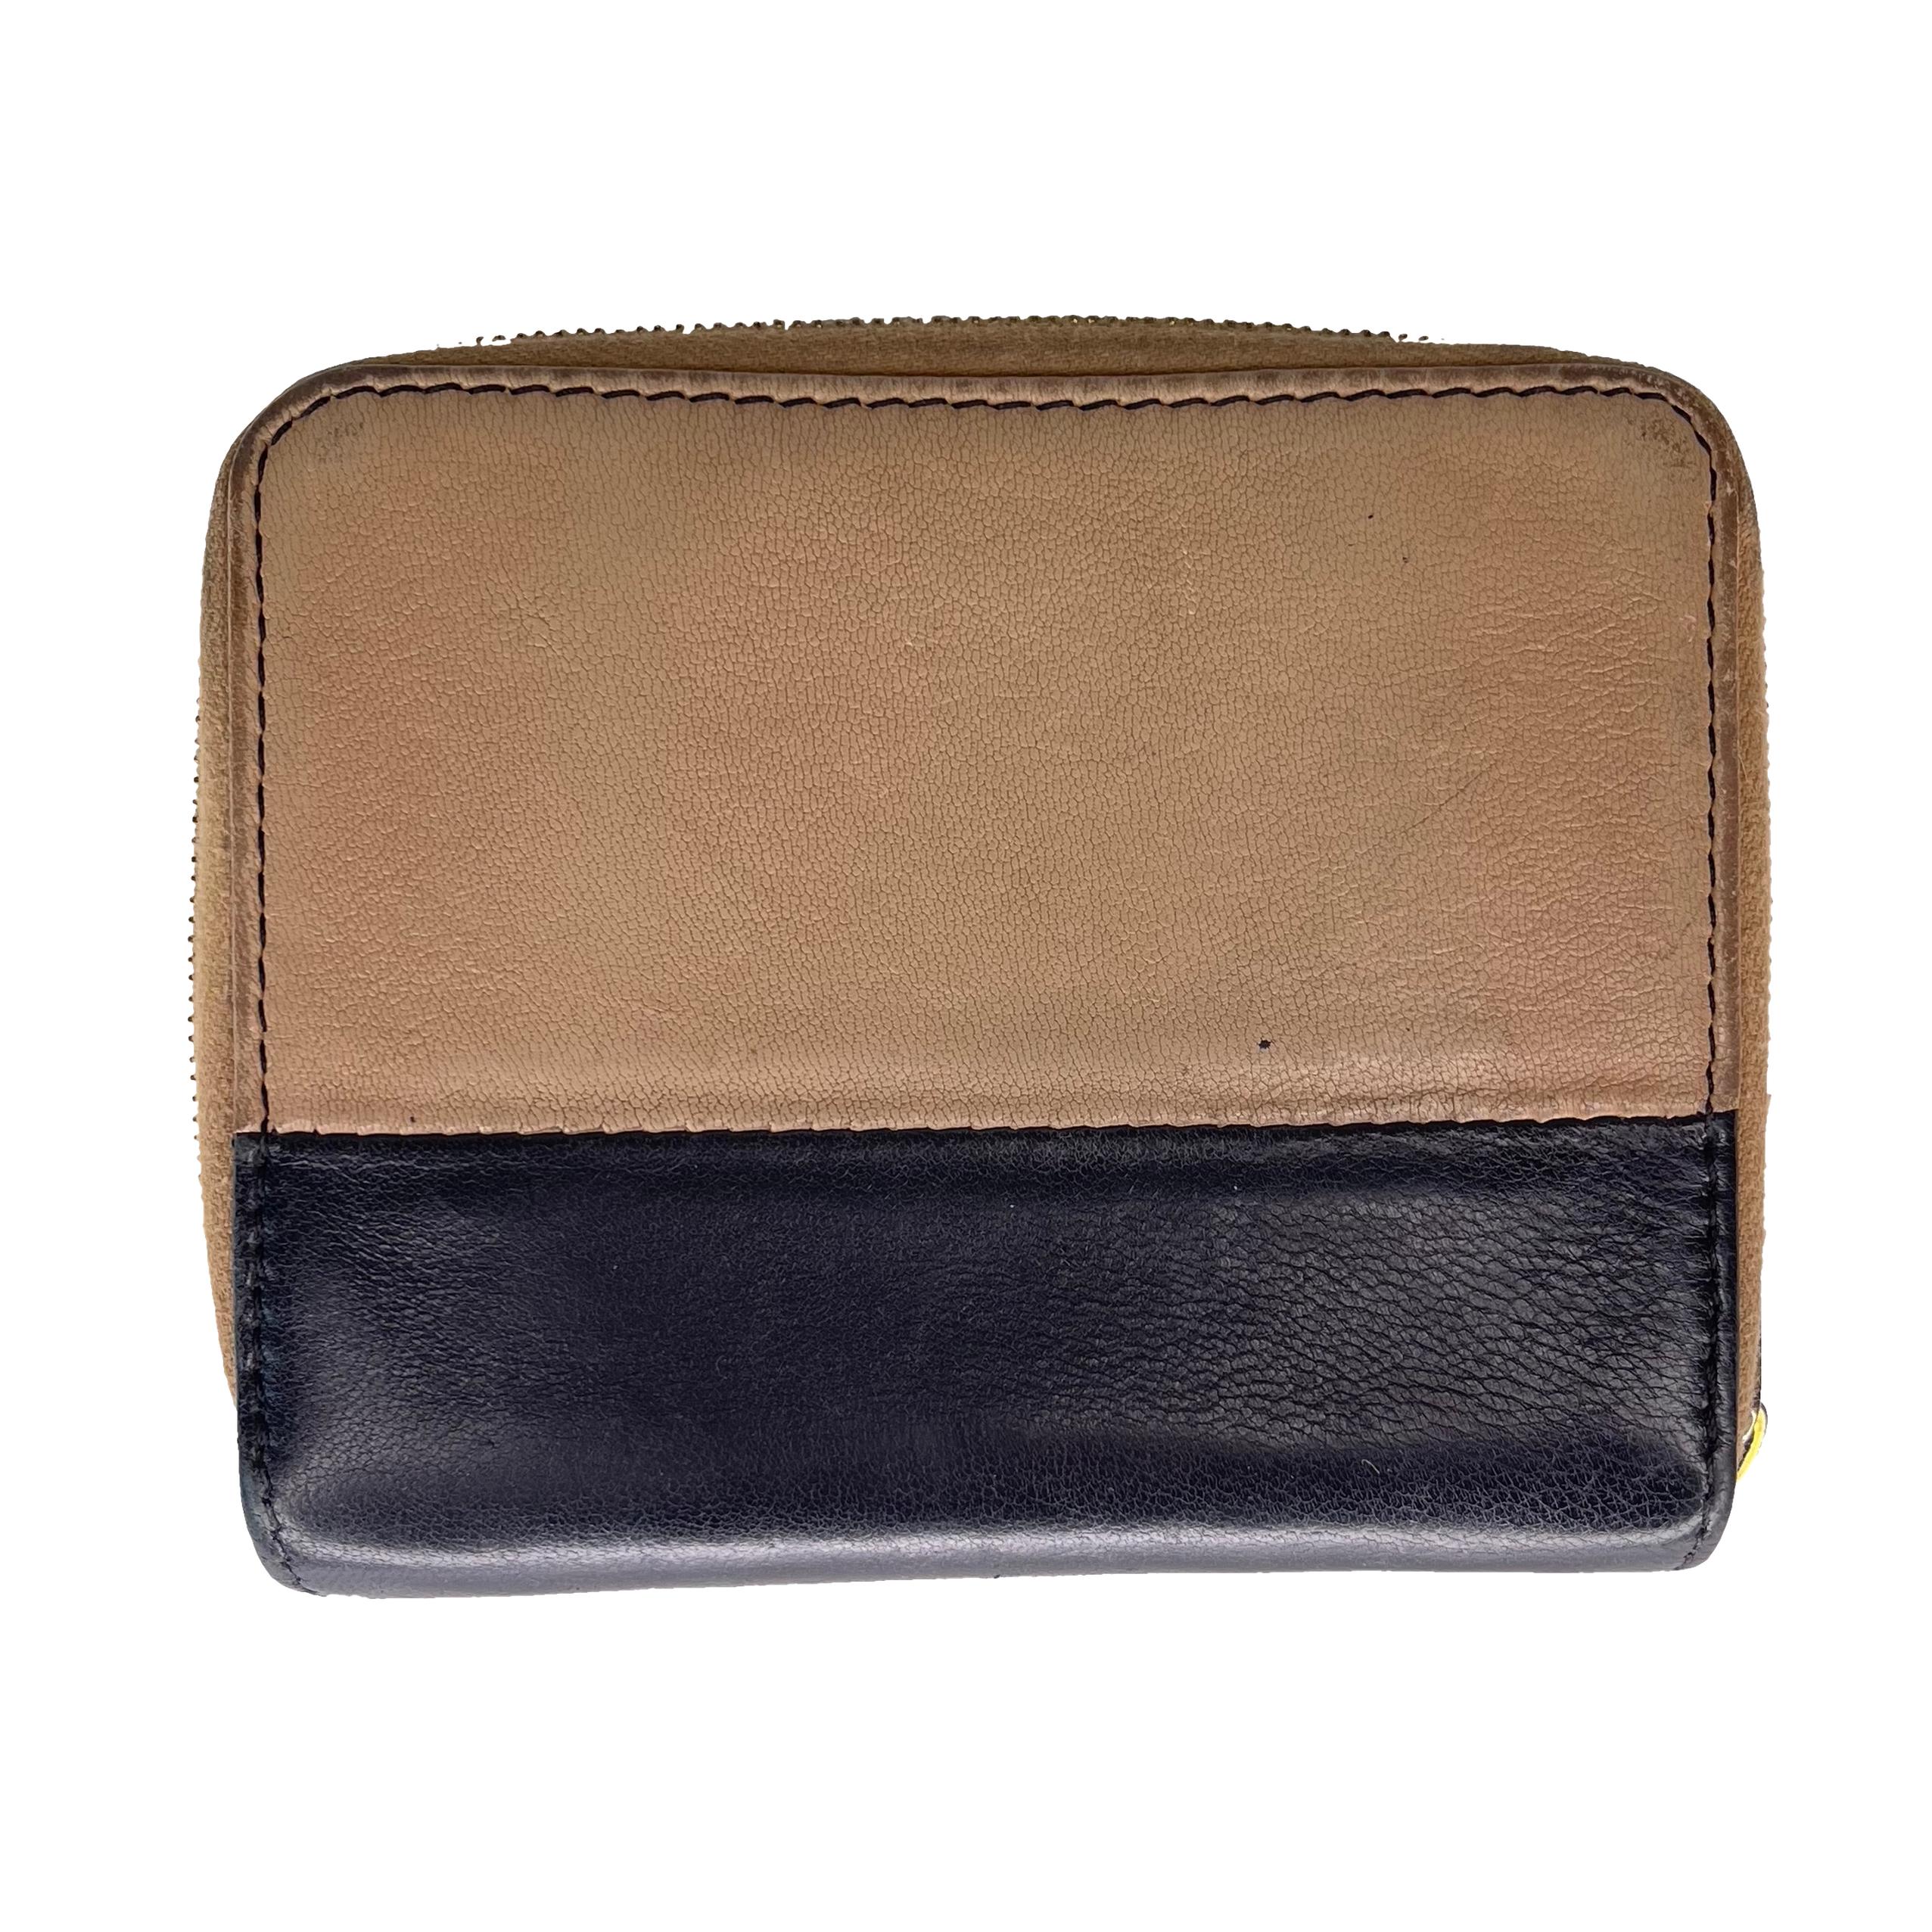 COLOR: Beige
MATERIAL: Leather
MEASURES: L 3.5” x W 5.4” x D 1”
CONDITION: Fair - signs of use with wear and tear throughout.